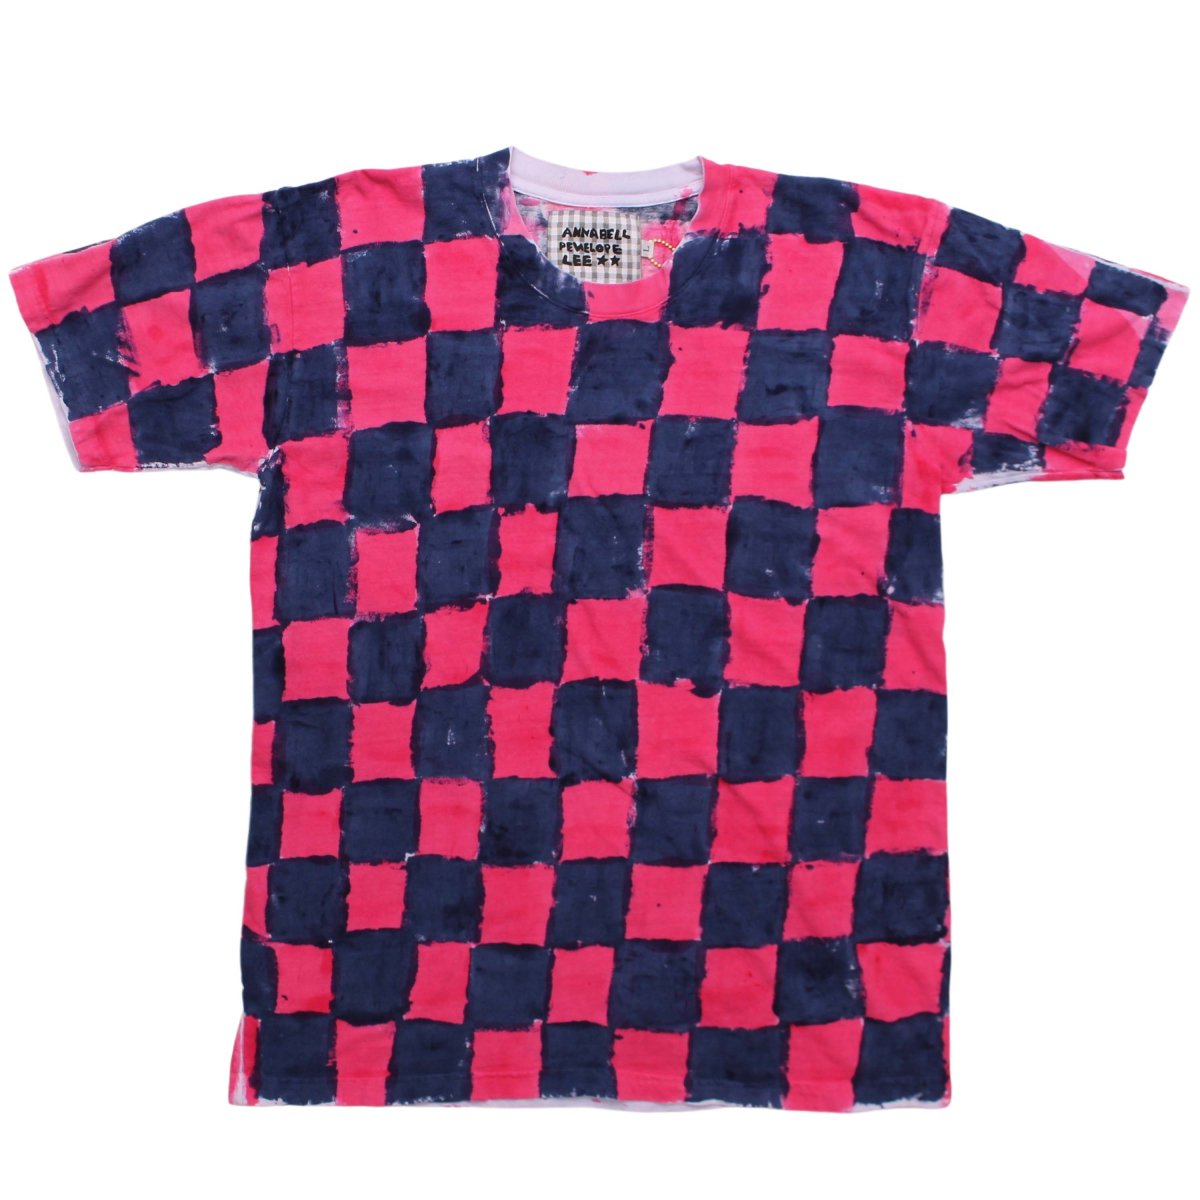 HAND PAINTED T SHIRT【Navy and hot pink checkers】